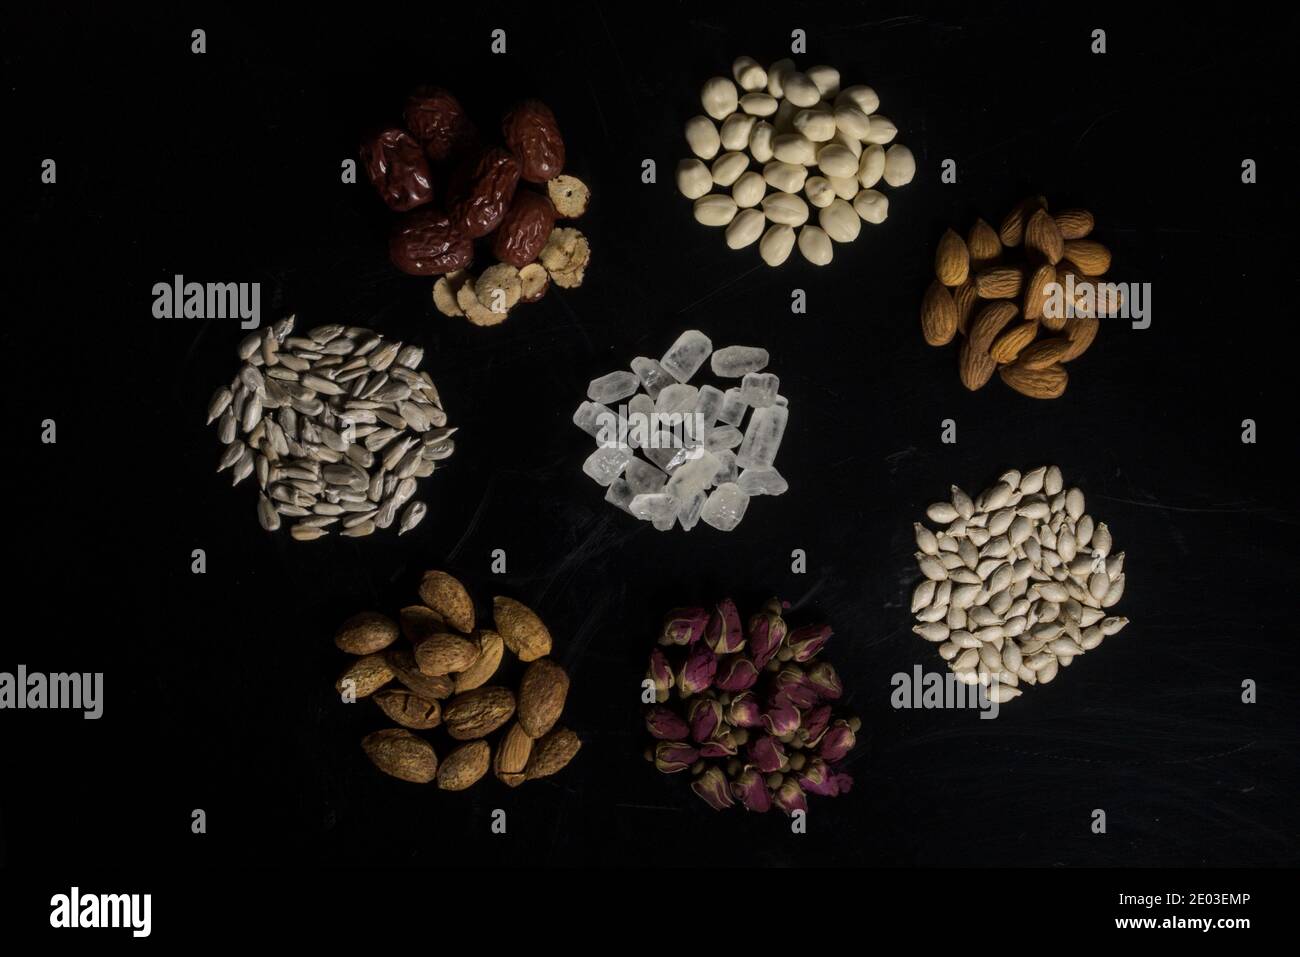 Eight ingredients on black background in flower shape, roses, red dates, rock candies, peanuts, almonds, sunflower seeds and winter melon seeds Stock Photo